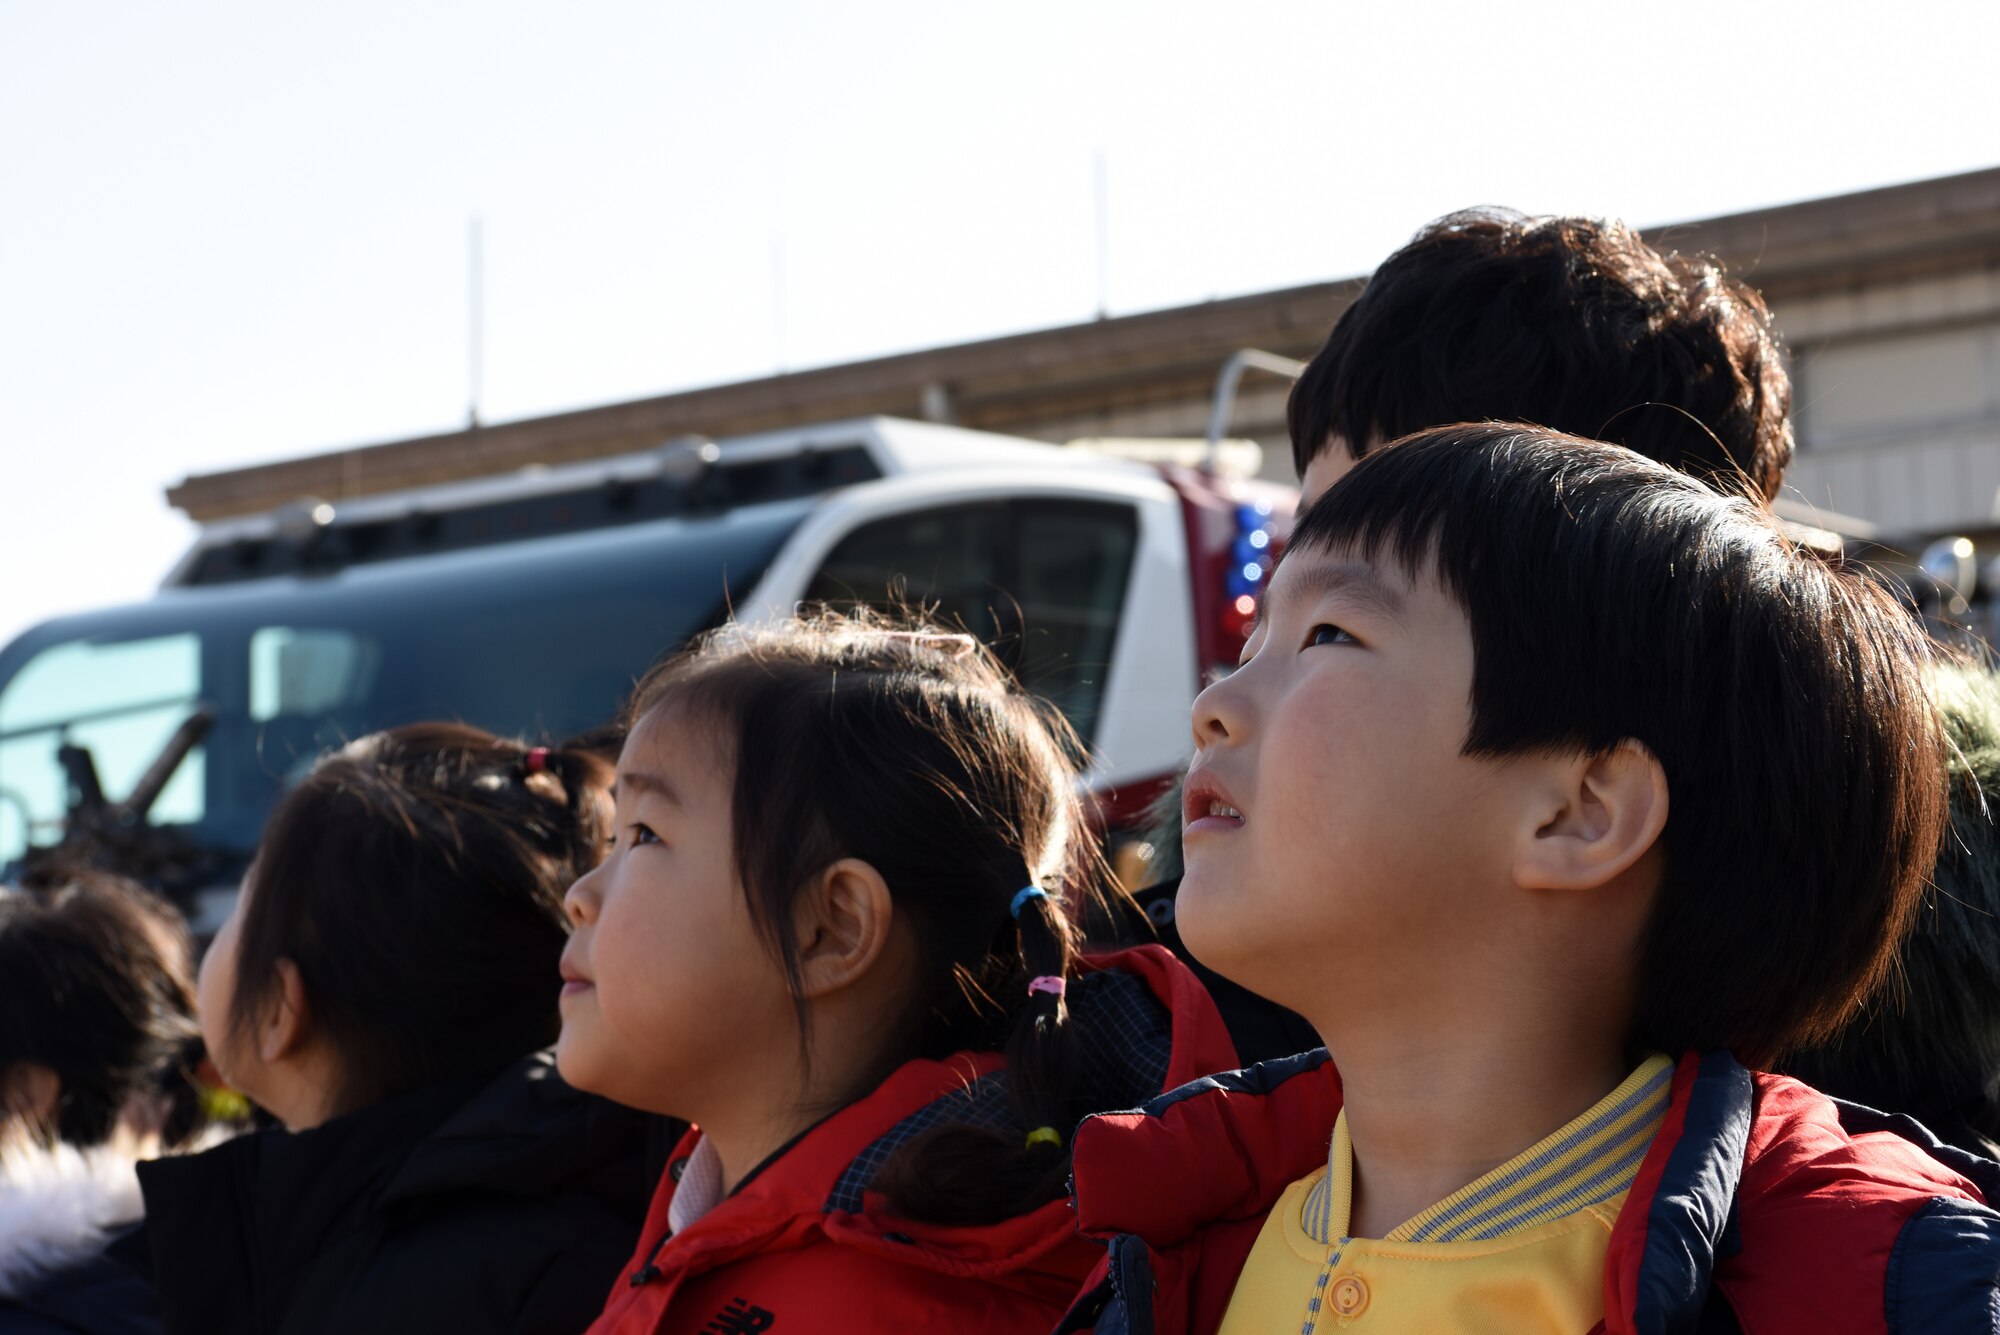 Kwon Na, Korean Christian International School student, watches as a fire truck sprays water into the air at Kunsan Air Base, Republic of Korea, Nov. 30, 2018. The students visited the 8th Civil Engineer Squadron to tour the fire station and learn more about being a firefighter. (U.S. Air Force photo by Staff Sgt. Joshua Edwards)